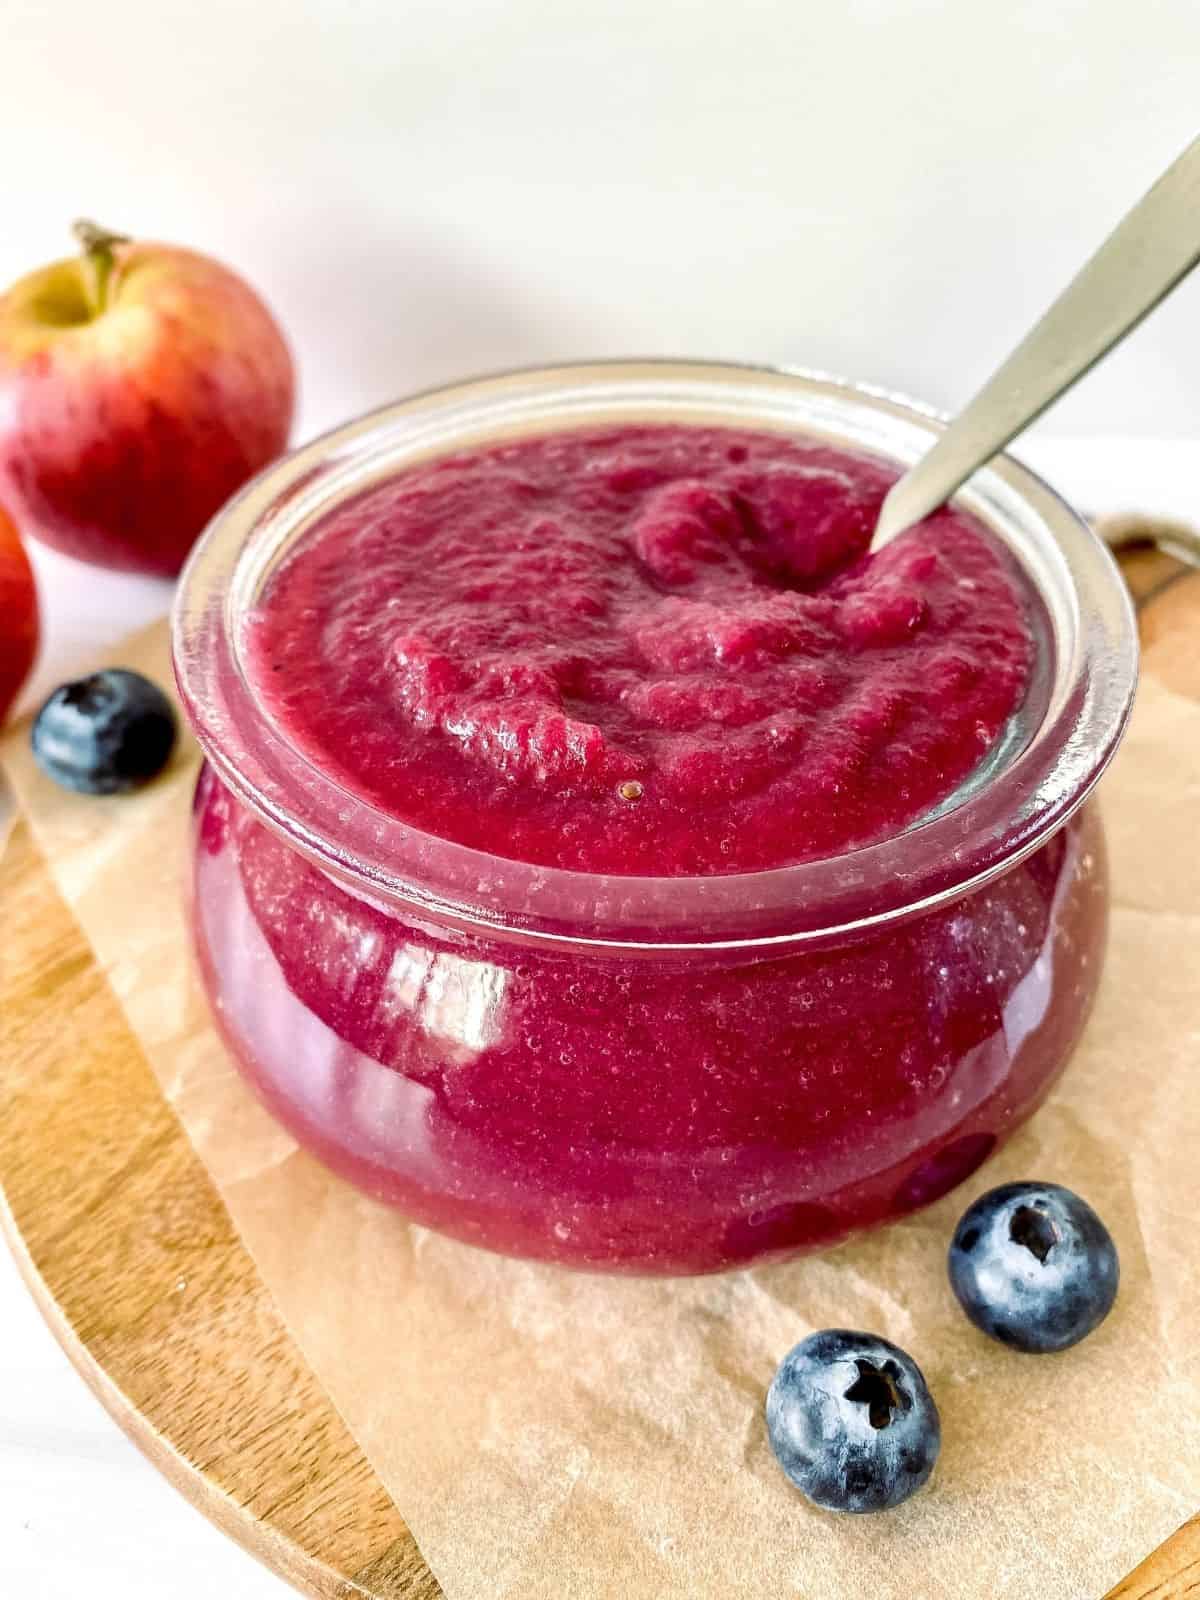 apple blueberry sauce in a glass jar with a spoon in it next to apples on a wooden board.